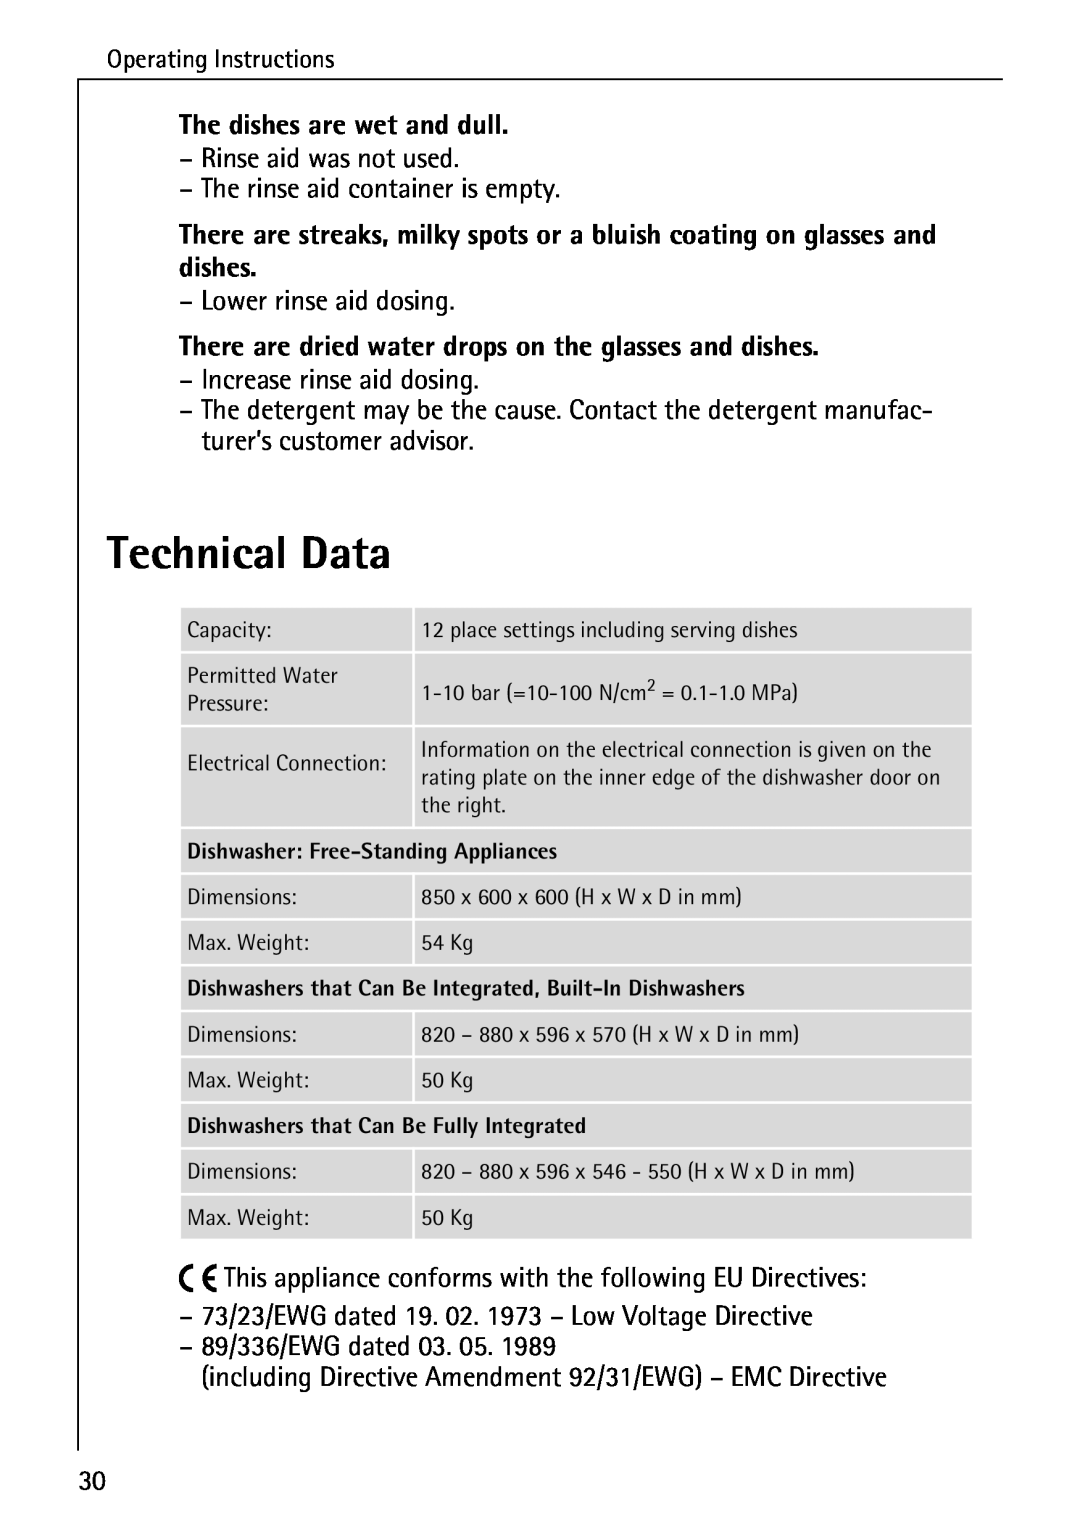 AEG 3A manual Technical Data, The dishes are wet and dull, There are dried water drops on the glasses and dishes 